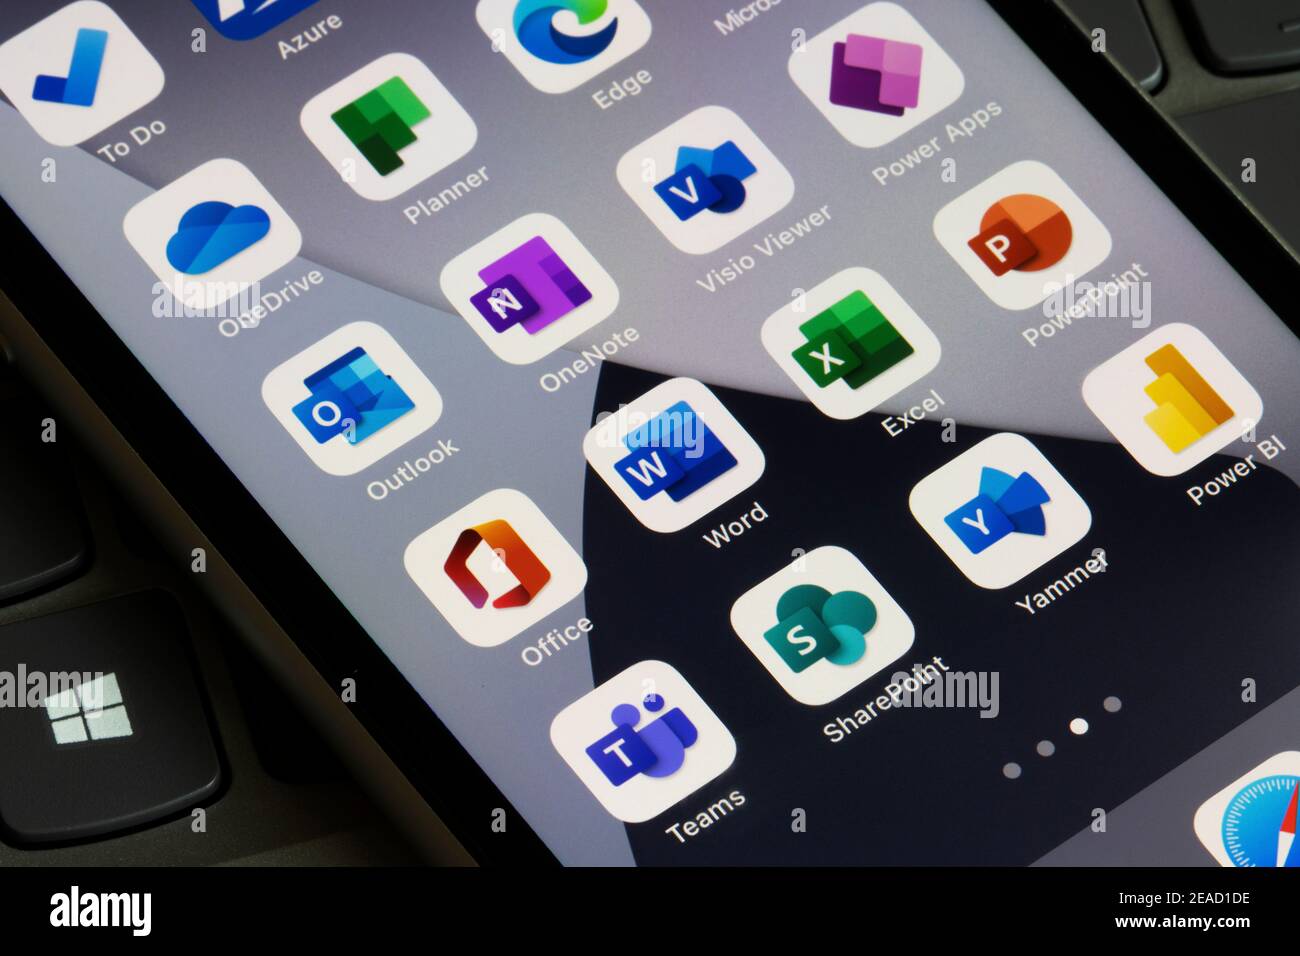 Microsoft 365 apps are seen on an iPhone - Office, Word, Excel, PowerPoint, Outlook, OneNote, Visio Viewer, Power Apps, Teams, SharePoint, Yammer, etc. Stock Photo